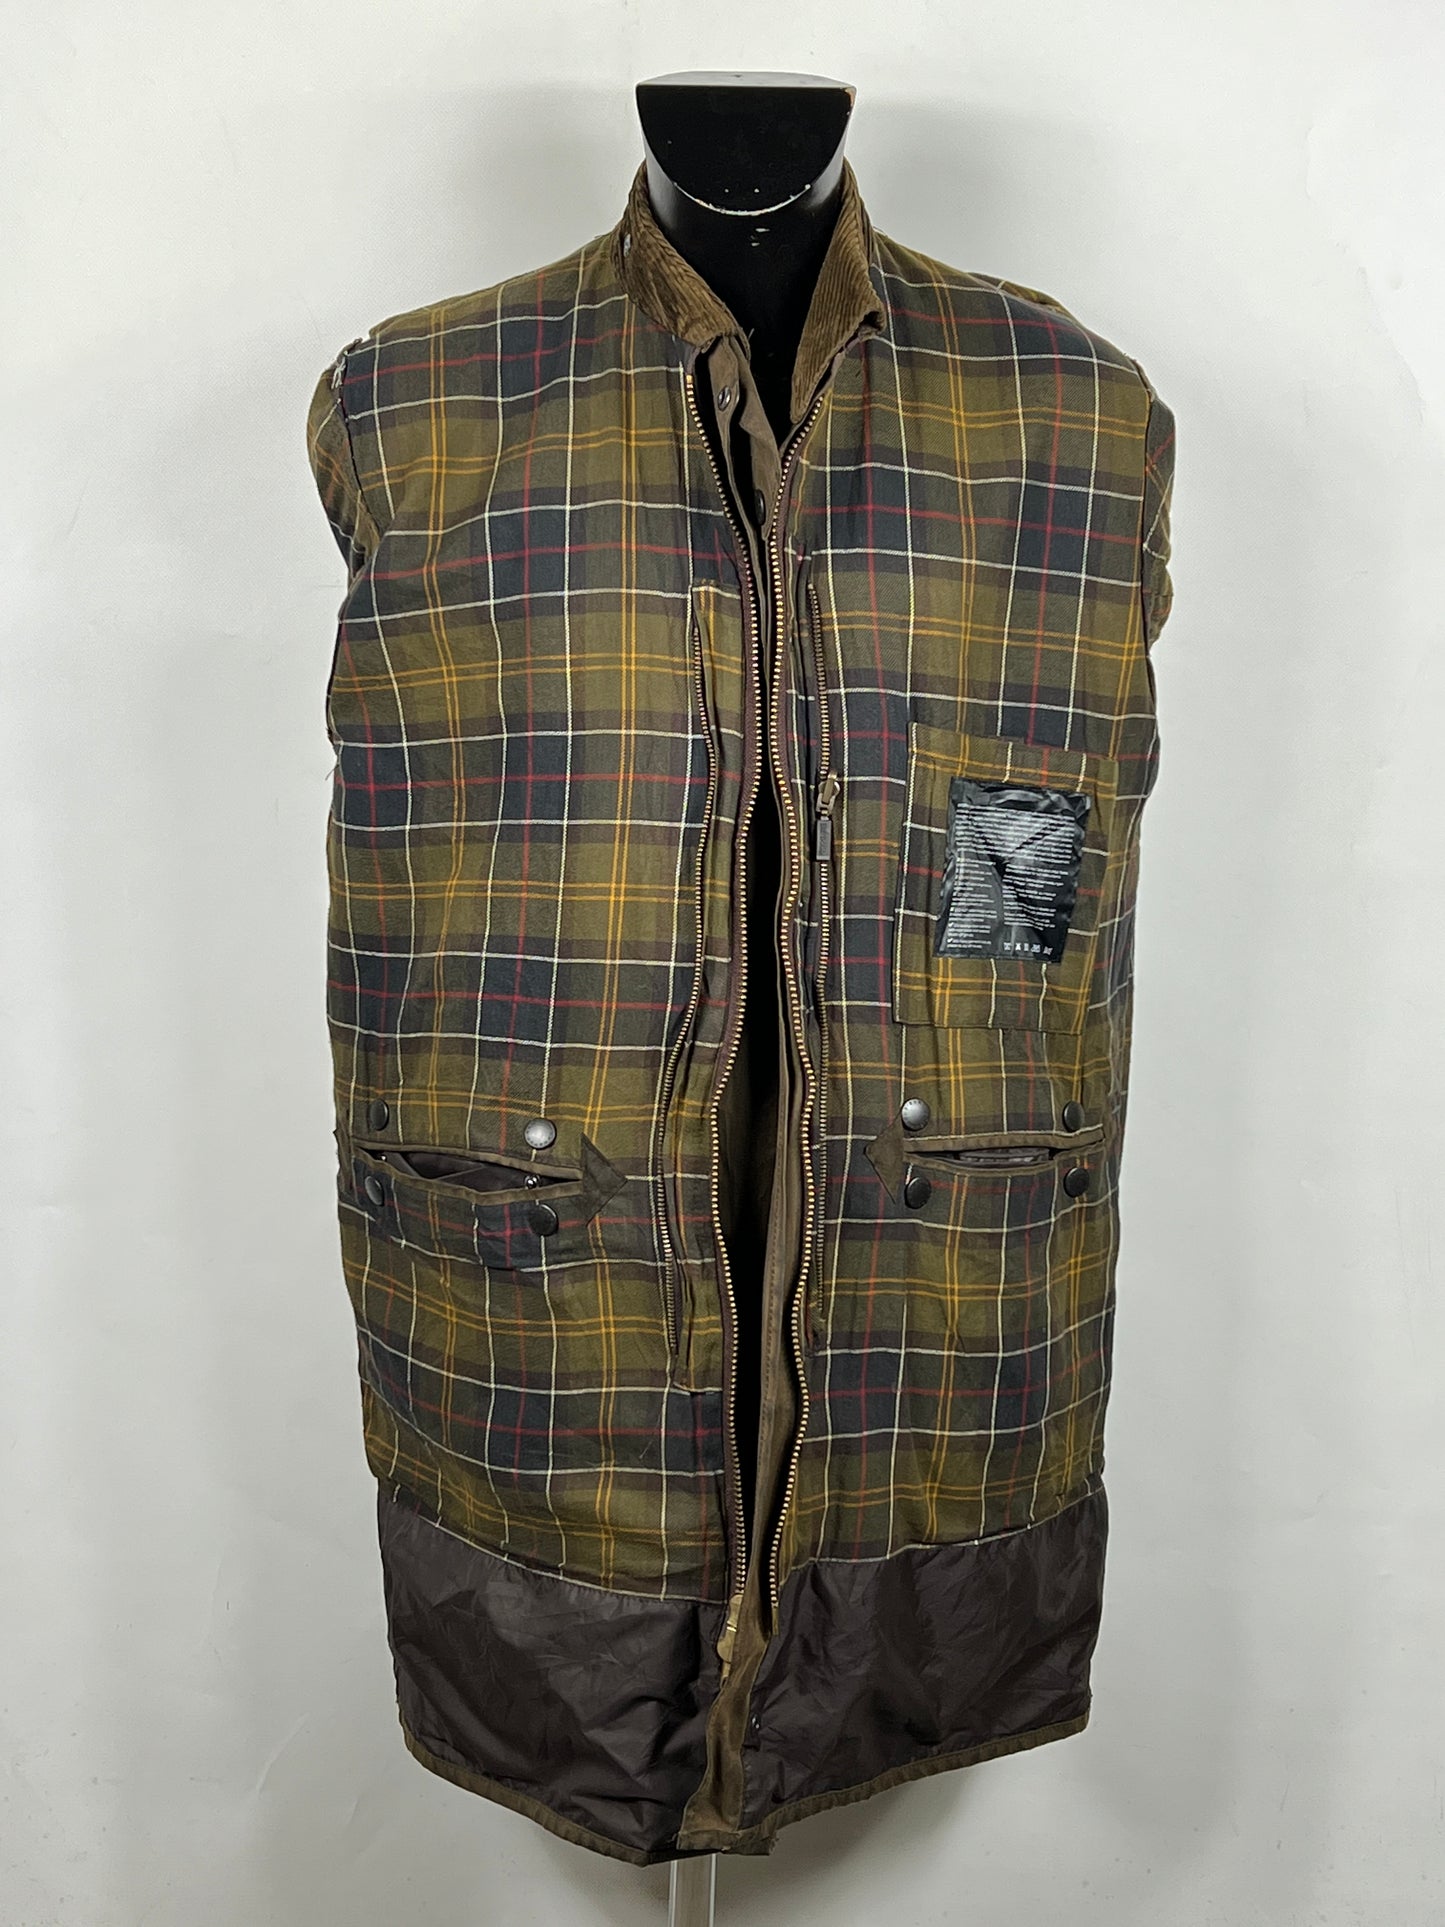 Giacca Barbour Northumbria c40/102 cm olive - Olive Northumbria wax jacket size M